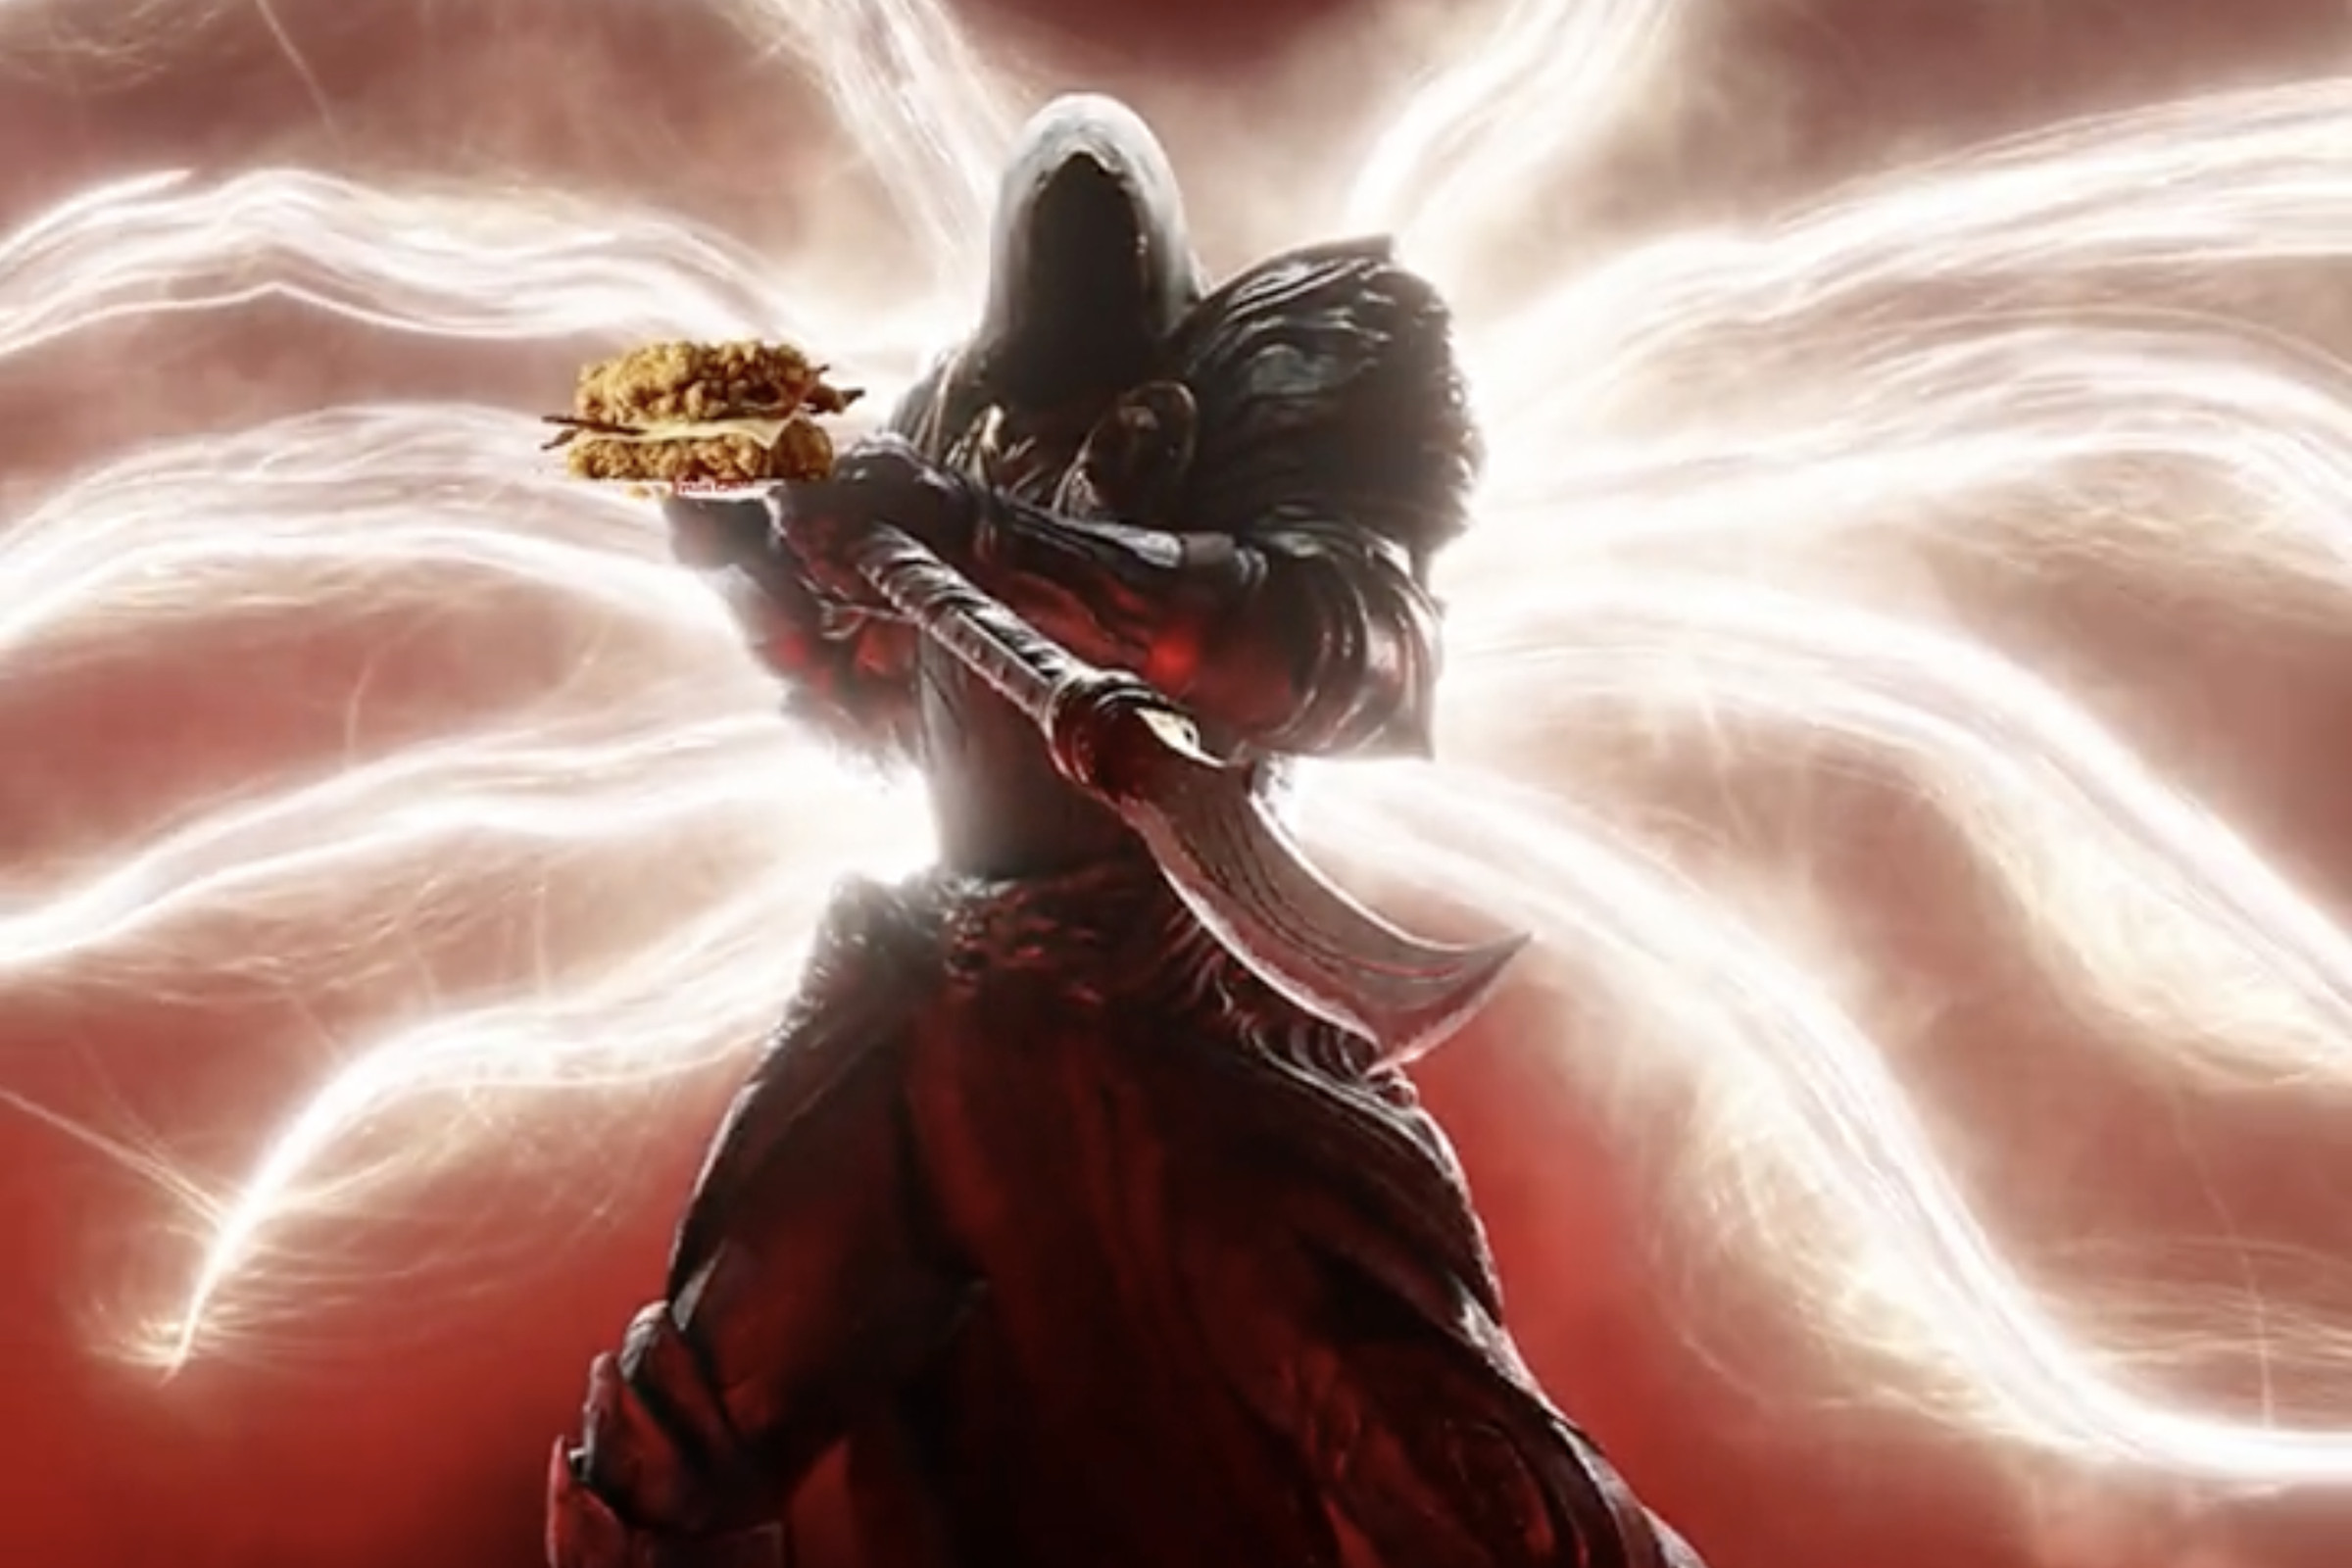 Image from a KFC promotional tweet featuring a Diablo IV character holding a KFC Double Down sandwich